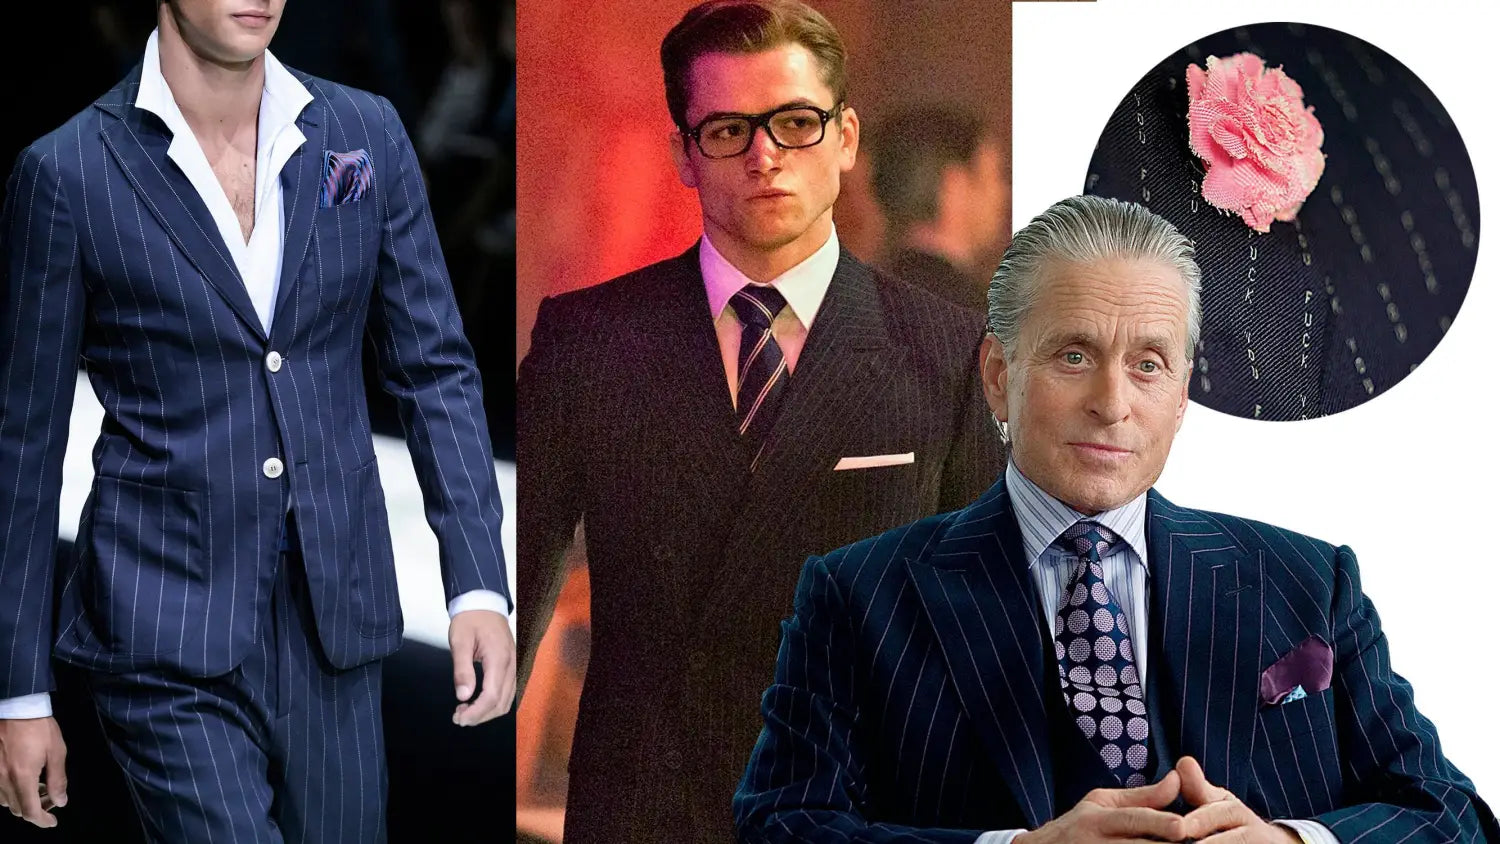 The classic pinstripe suit is making a comeback